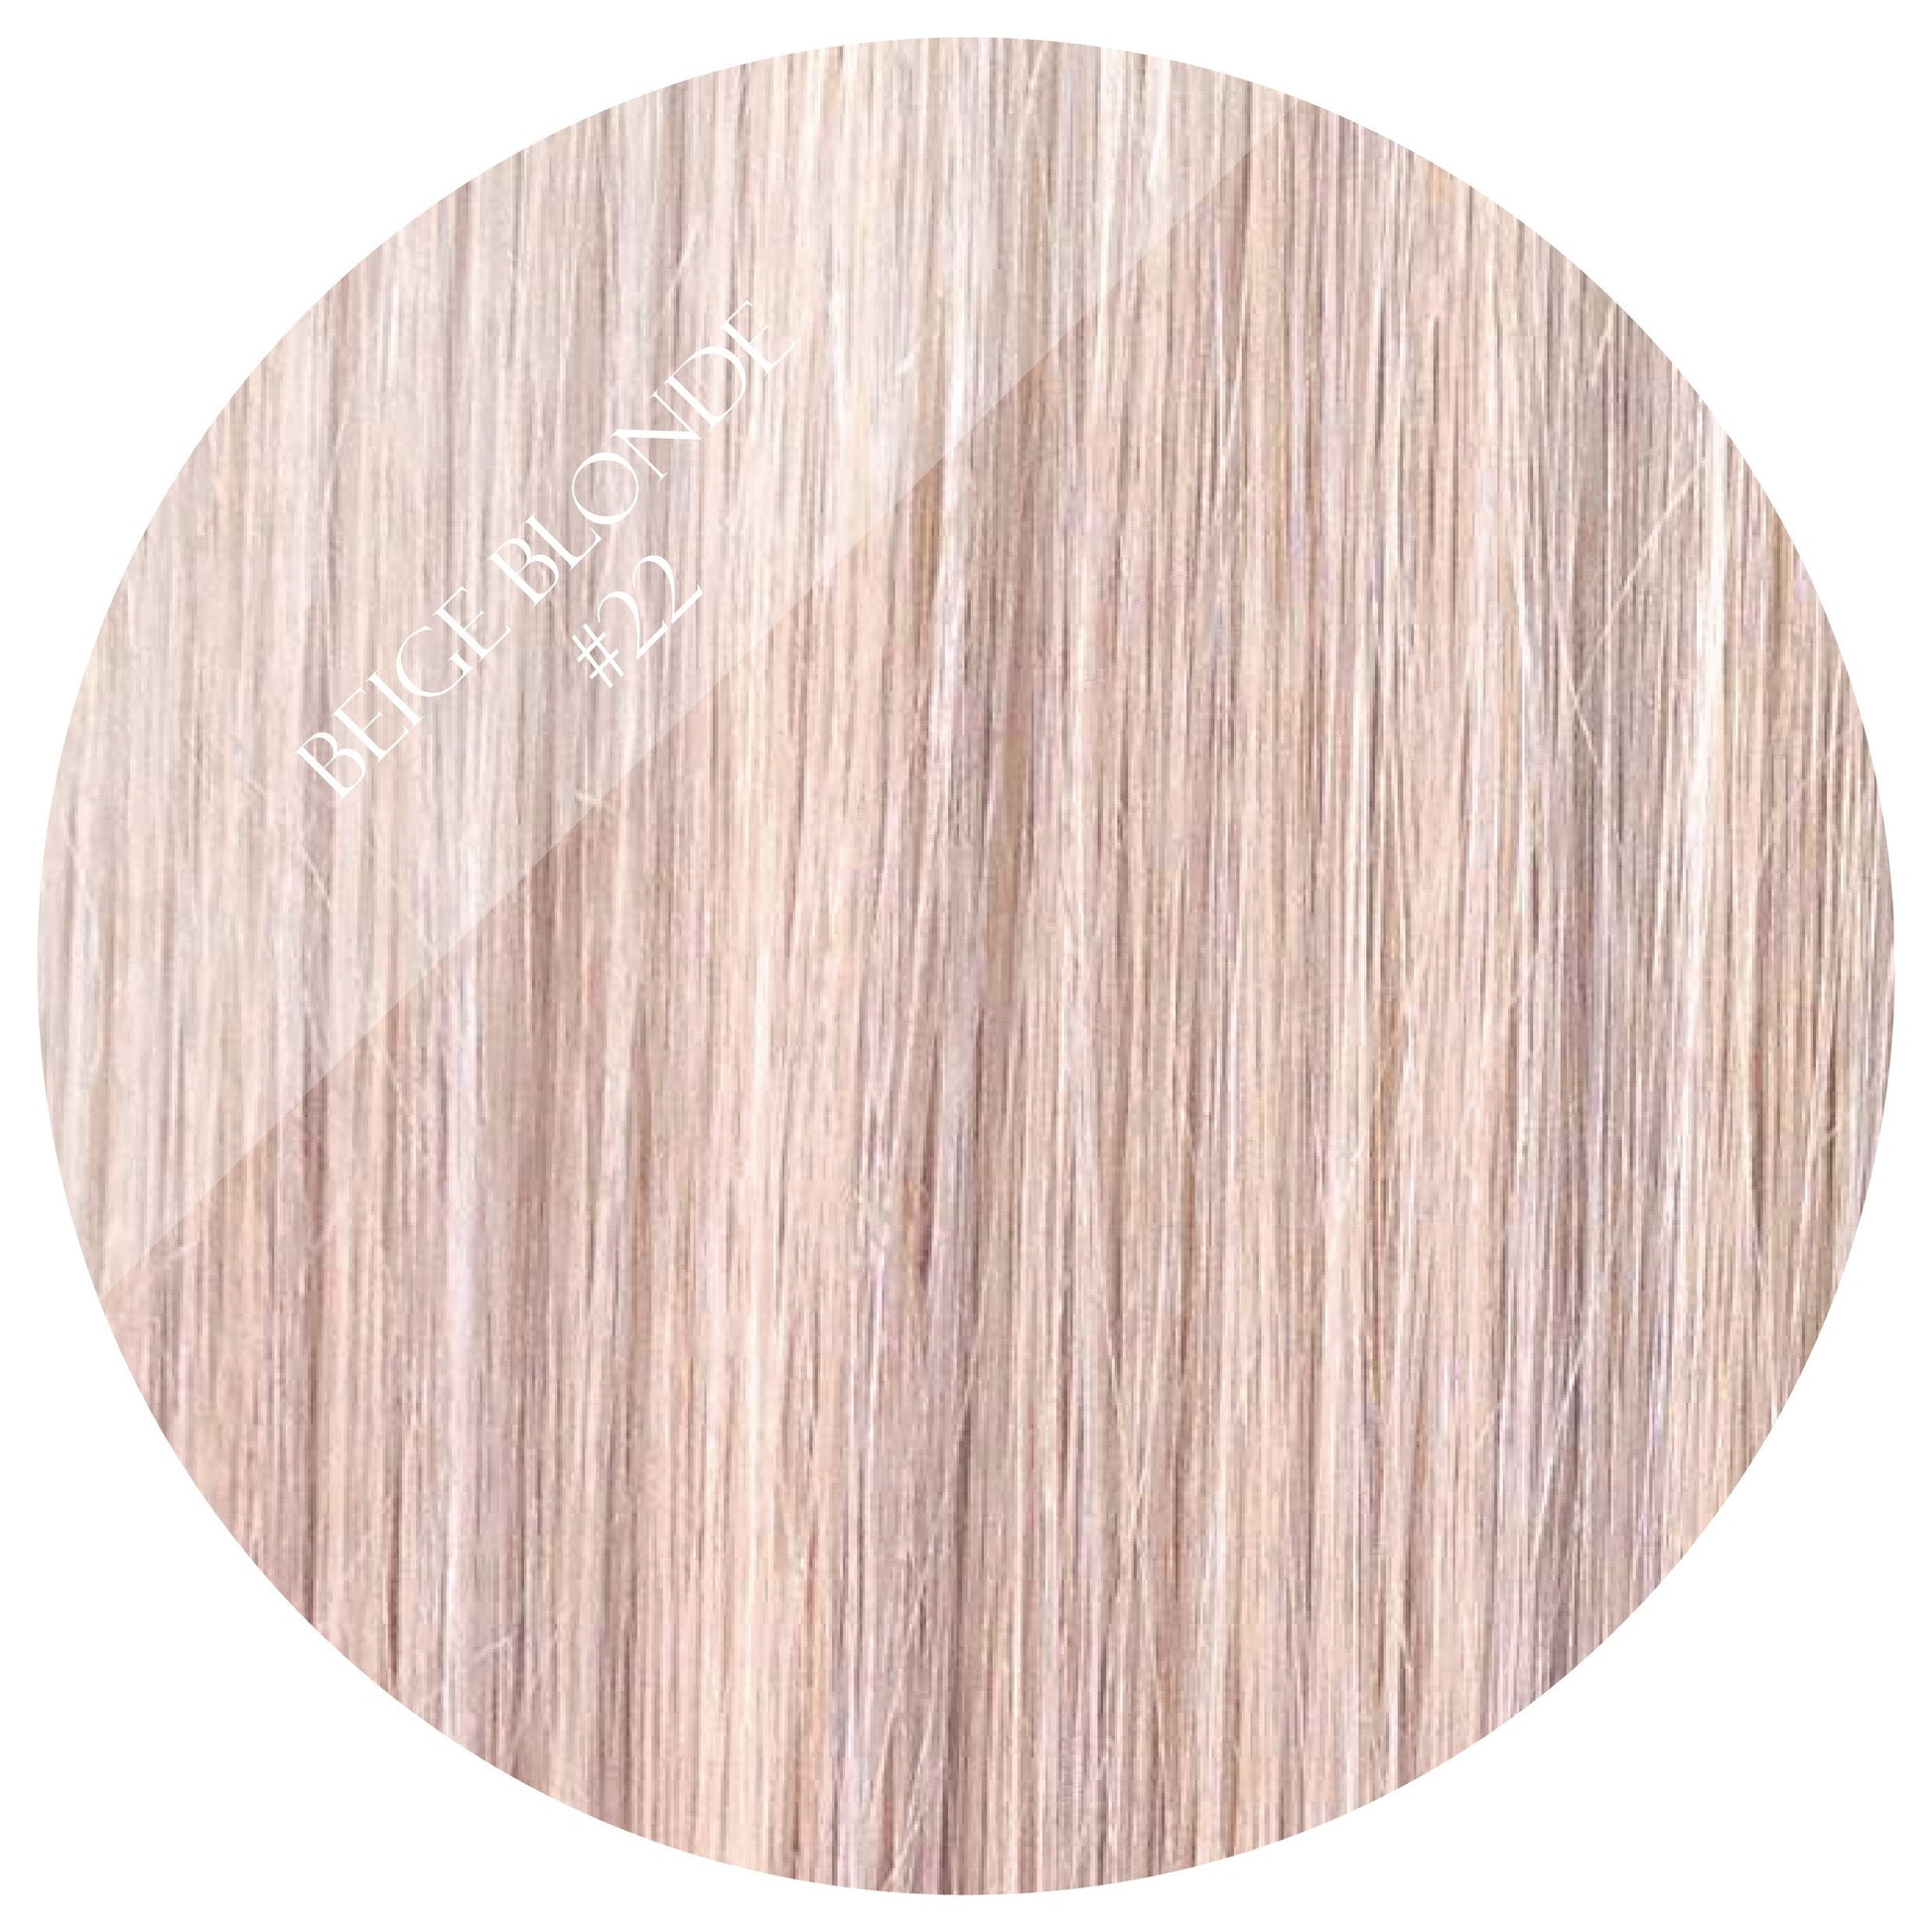 creme brulee blonde #22 tape hair extensions 26inch 80pcs - two full heads